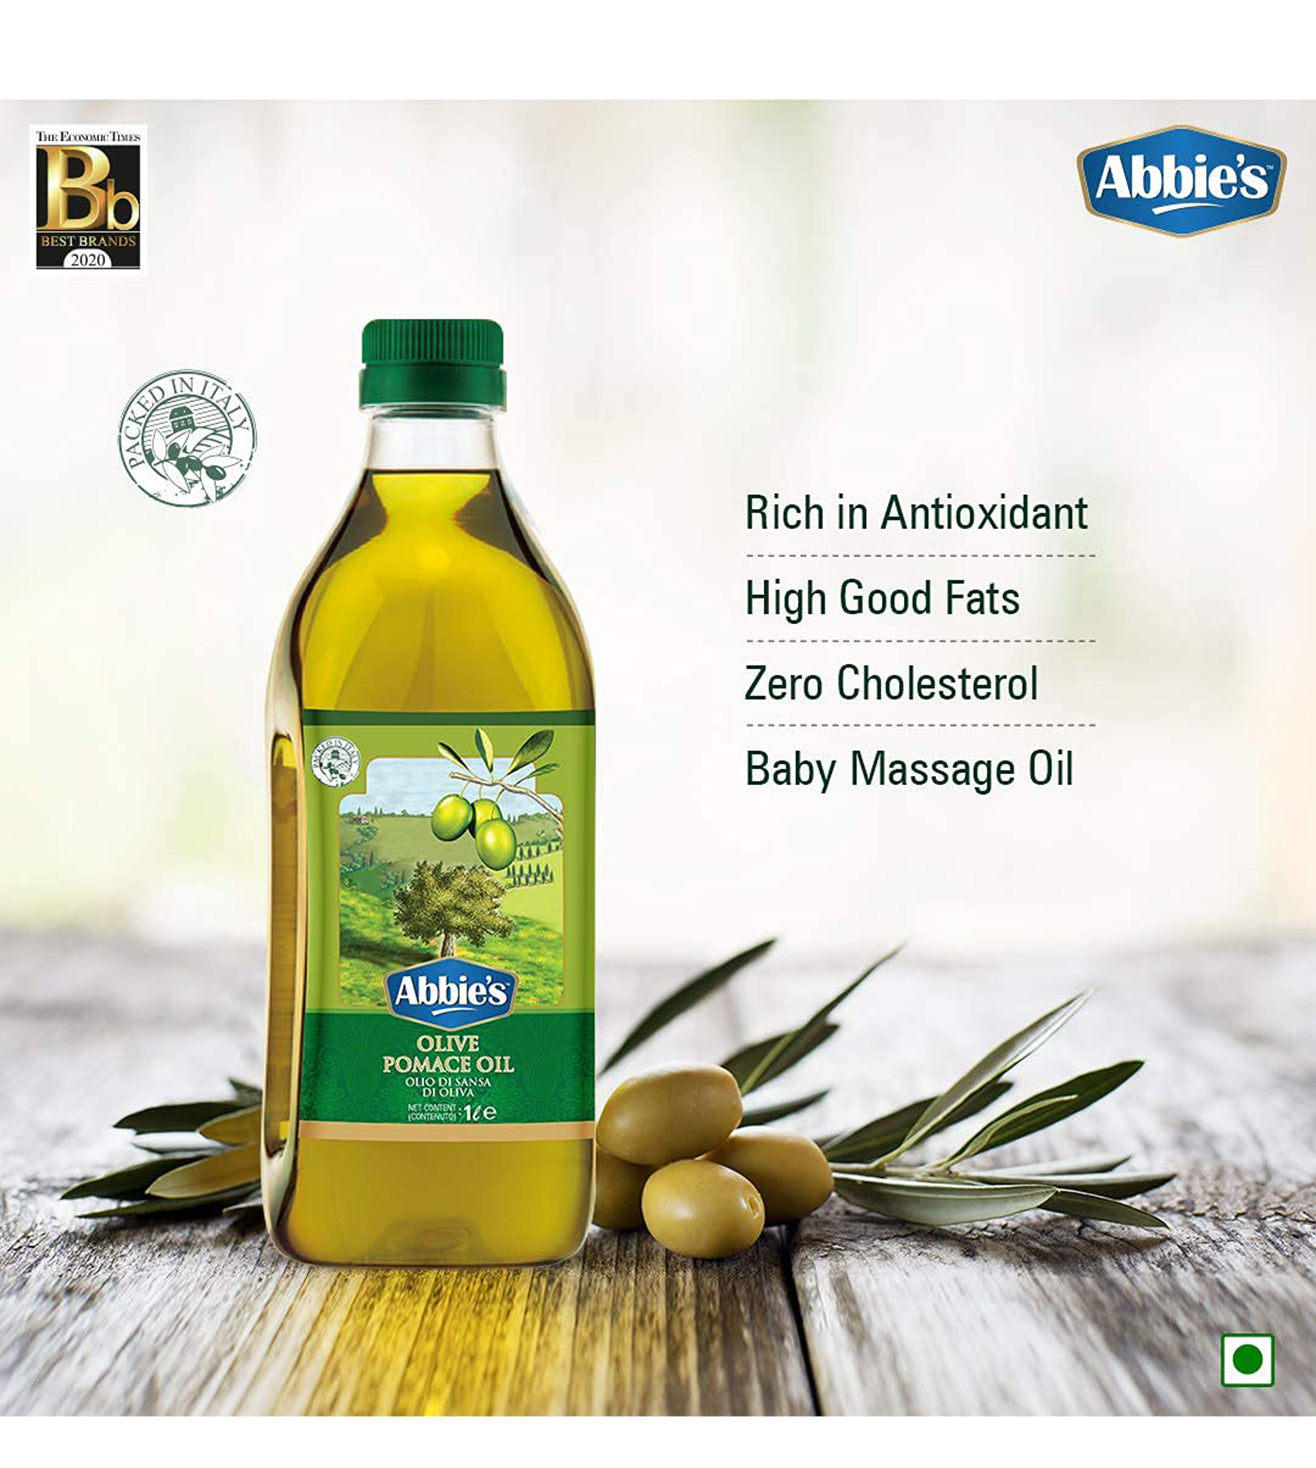 Abbies Pomace Olive Oil, 1L (Imported)